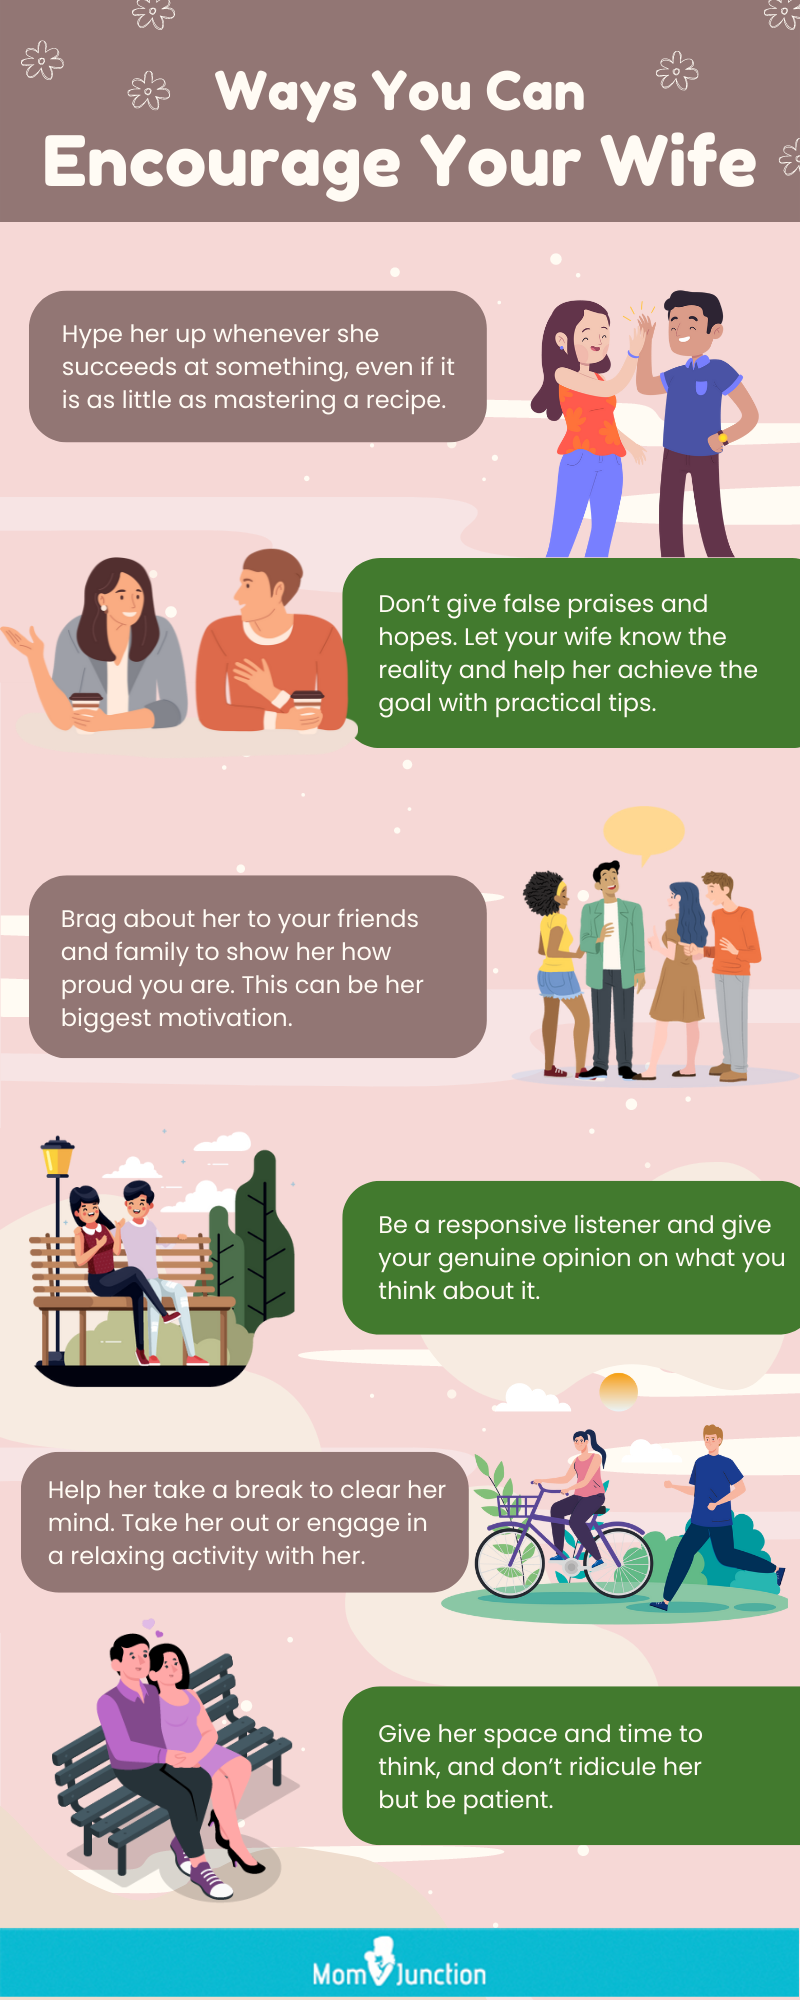 ways you can encourage your wife (infographic)